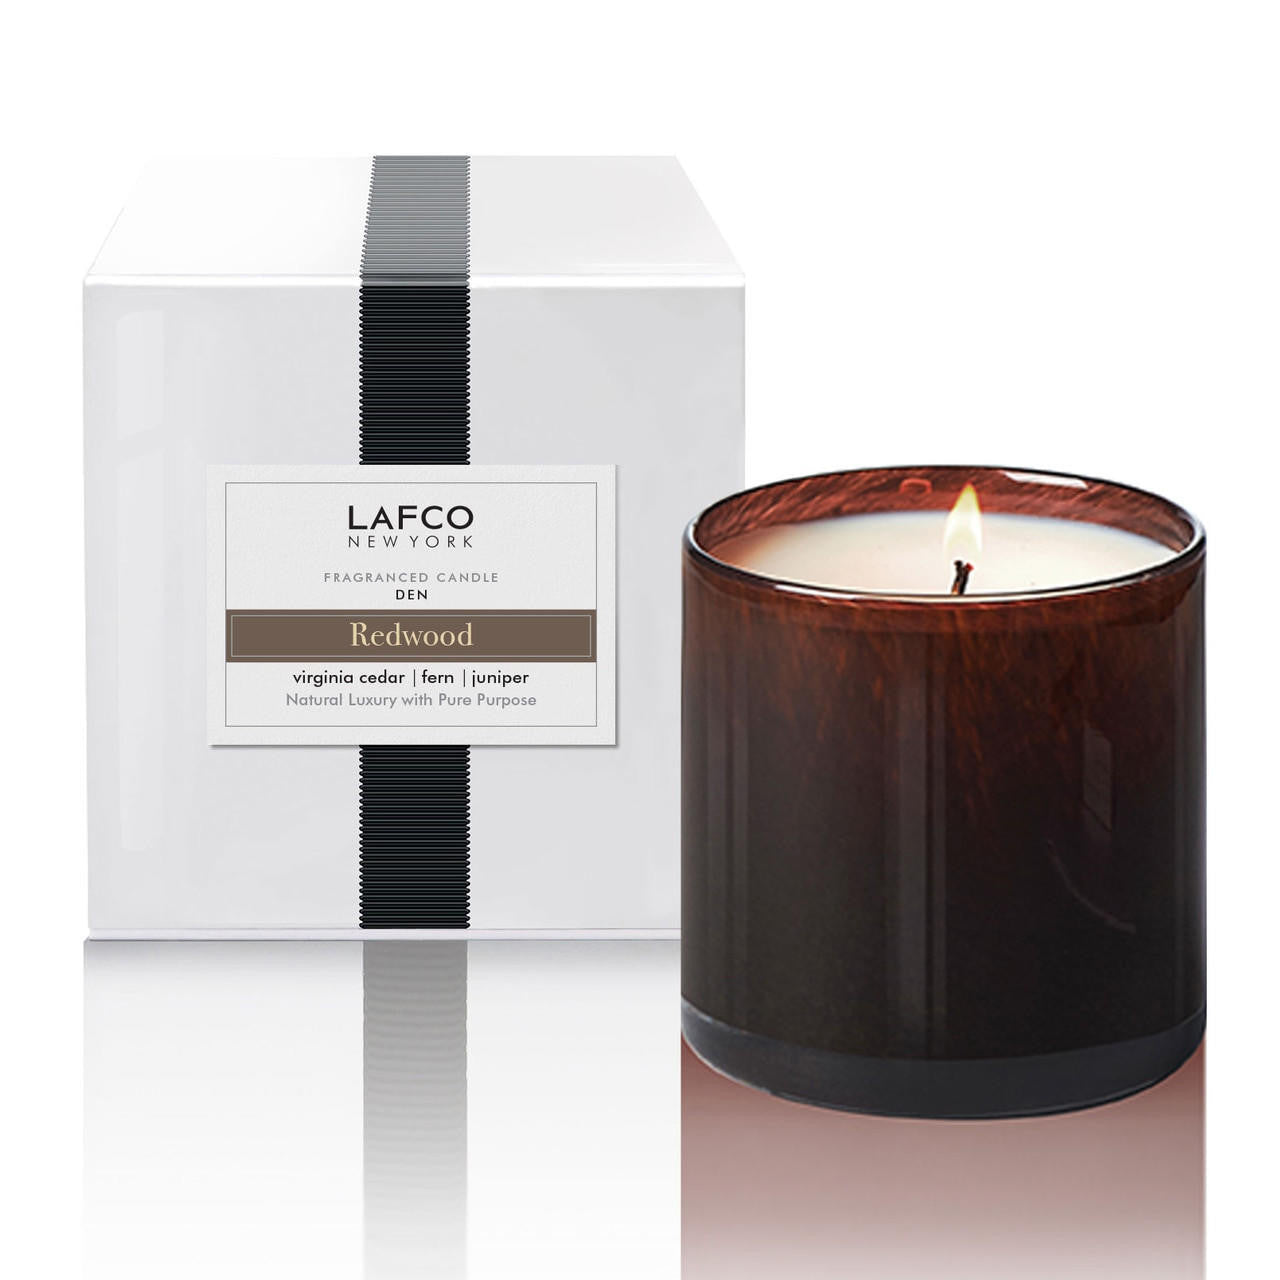  Lafco Redwood Candle 